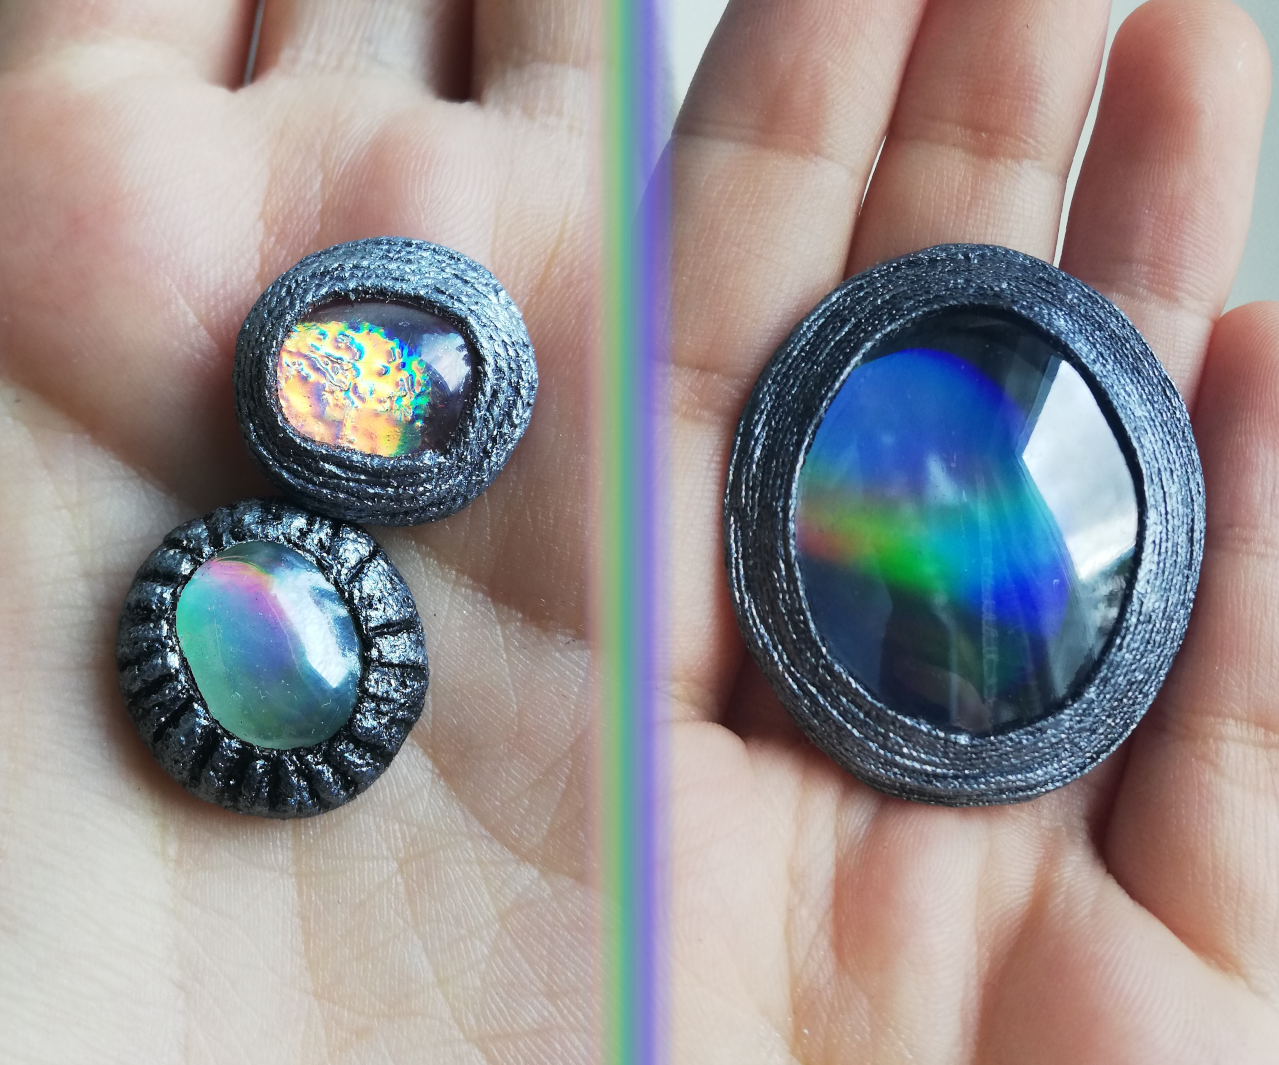 Holographic Gemstones From CDs